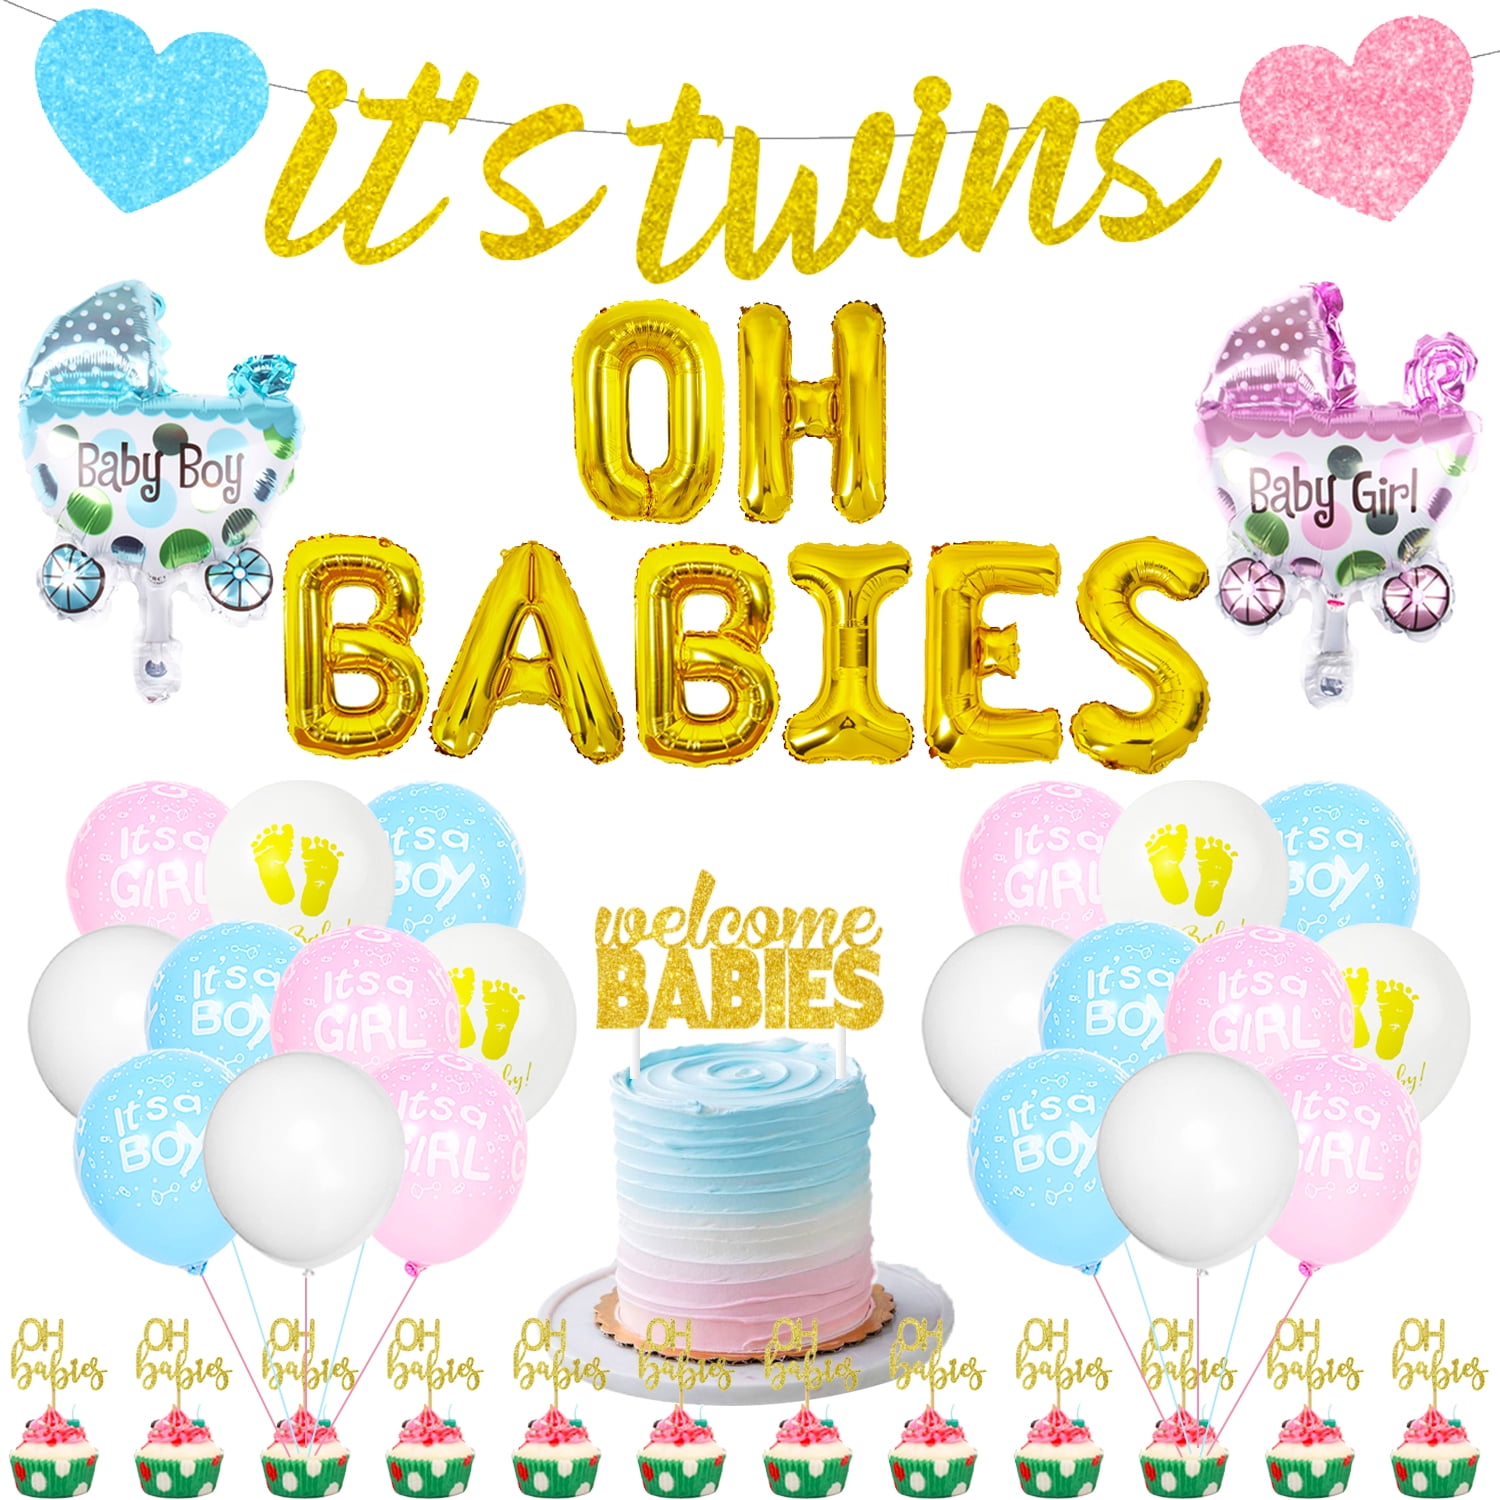 Twins Baby Shower Set, Oh Babies Twins Decorations, Glitter It's Twins Banner Pink and Blue Balloons Set, for Babies Twin Baby Shower Gender Reveal Party Supplies - Walmart.com